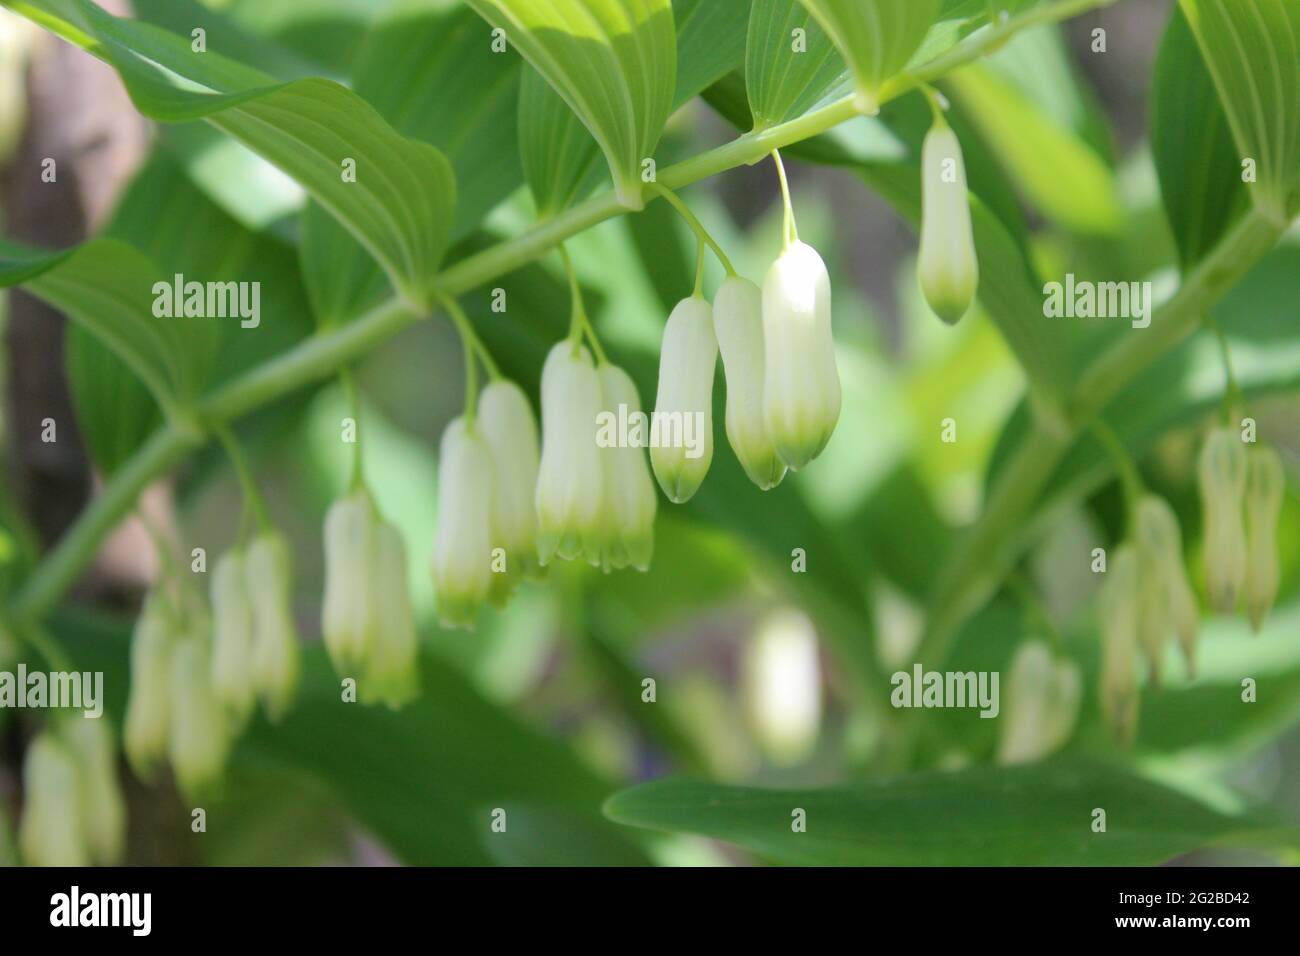 Spring growing flowers and nature that comes alive. Stock Photo